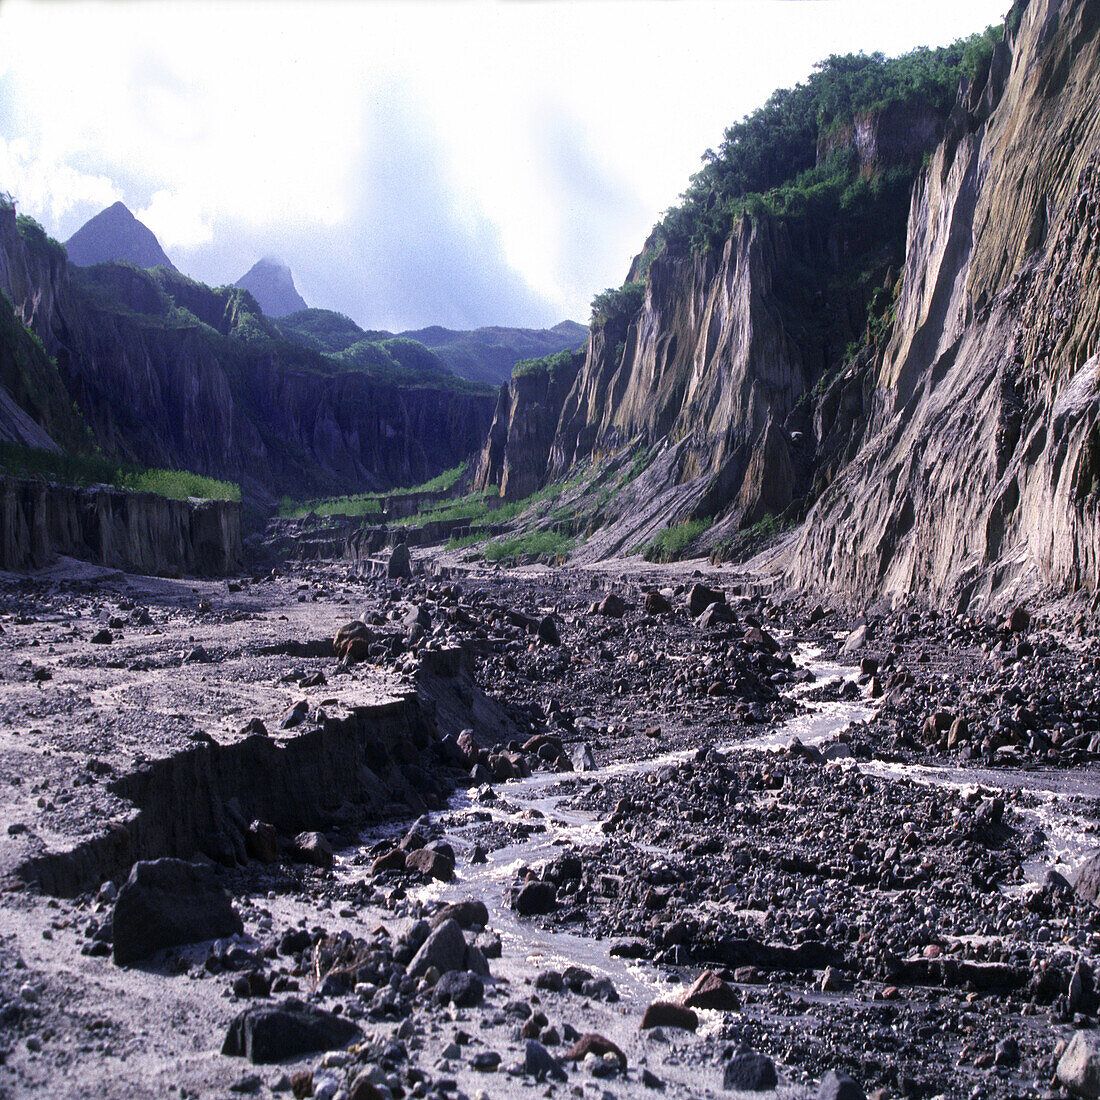 After eruption of Mount Pinatubo, Pinatubo volcano, Luzon Island Philippines